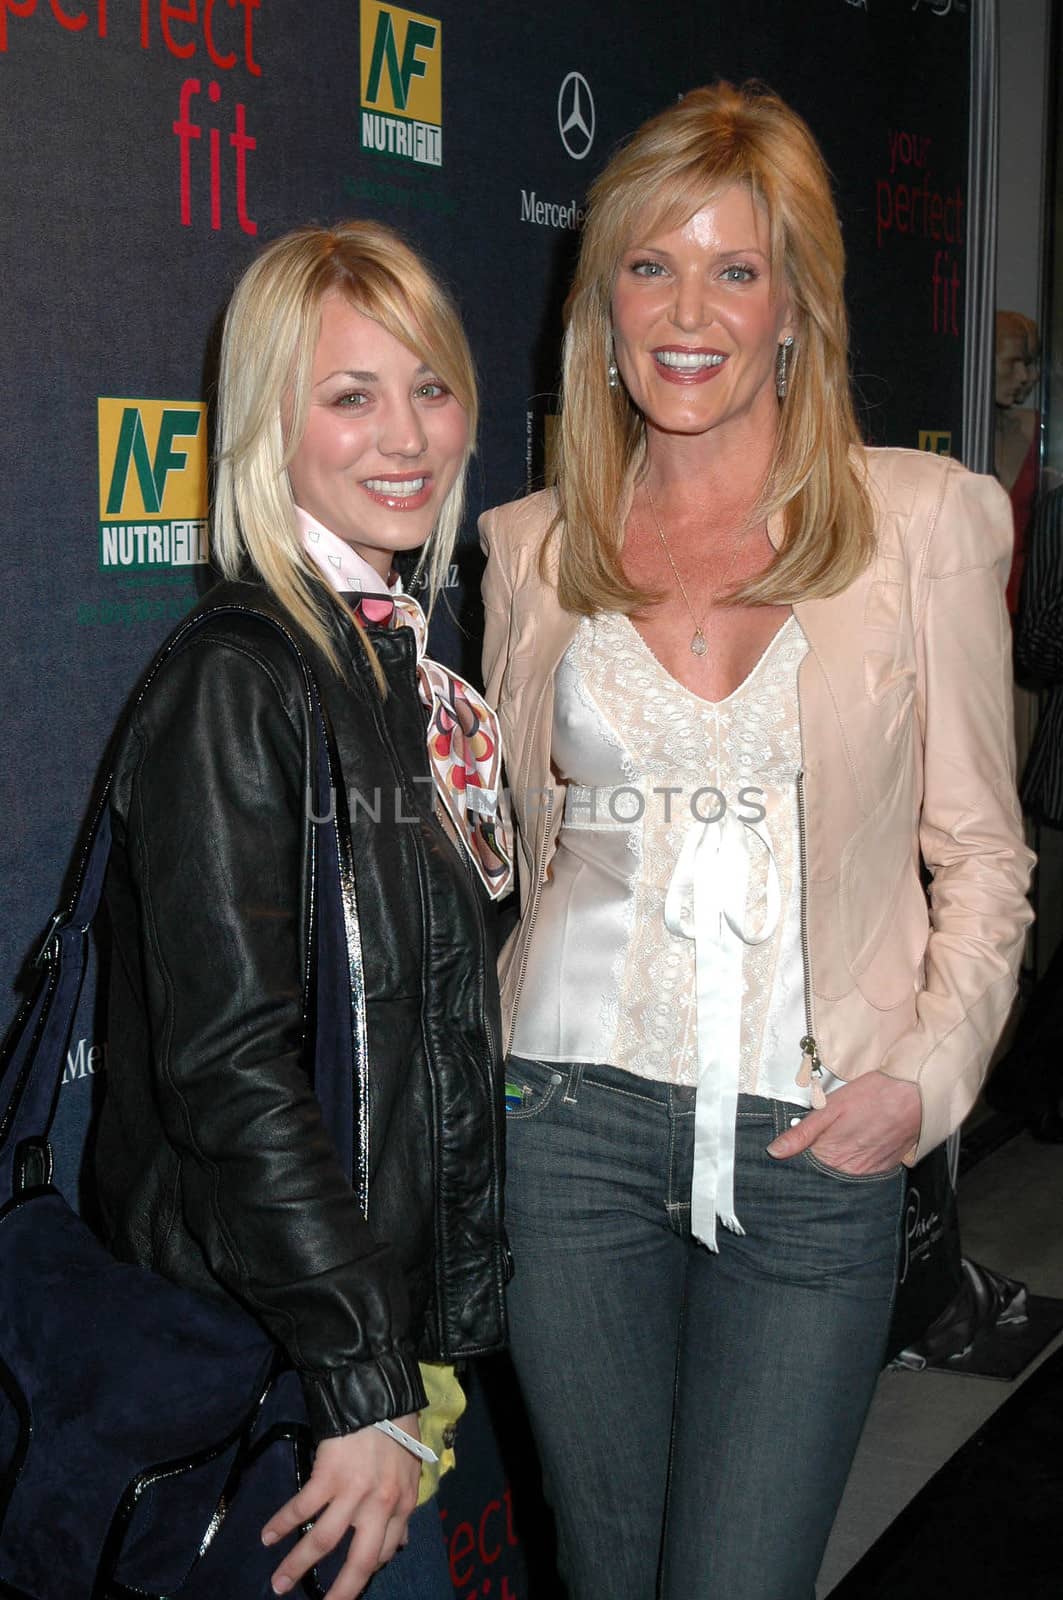 Kaley Cuoco and Paige Adams-Geller at the Debut of "Your Perfect Fit" Lifestyle Guide. Paige Premium Denim Boutique, West Hollywood, CA. 02-28-08